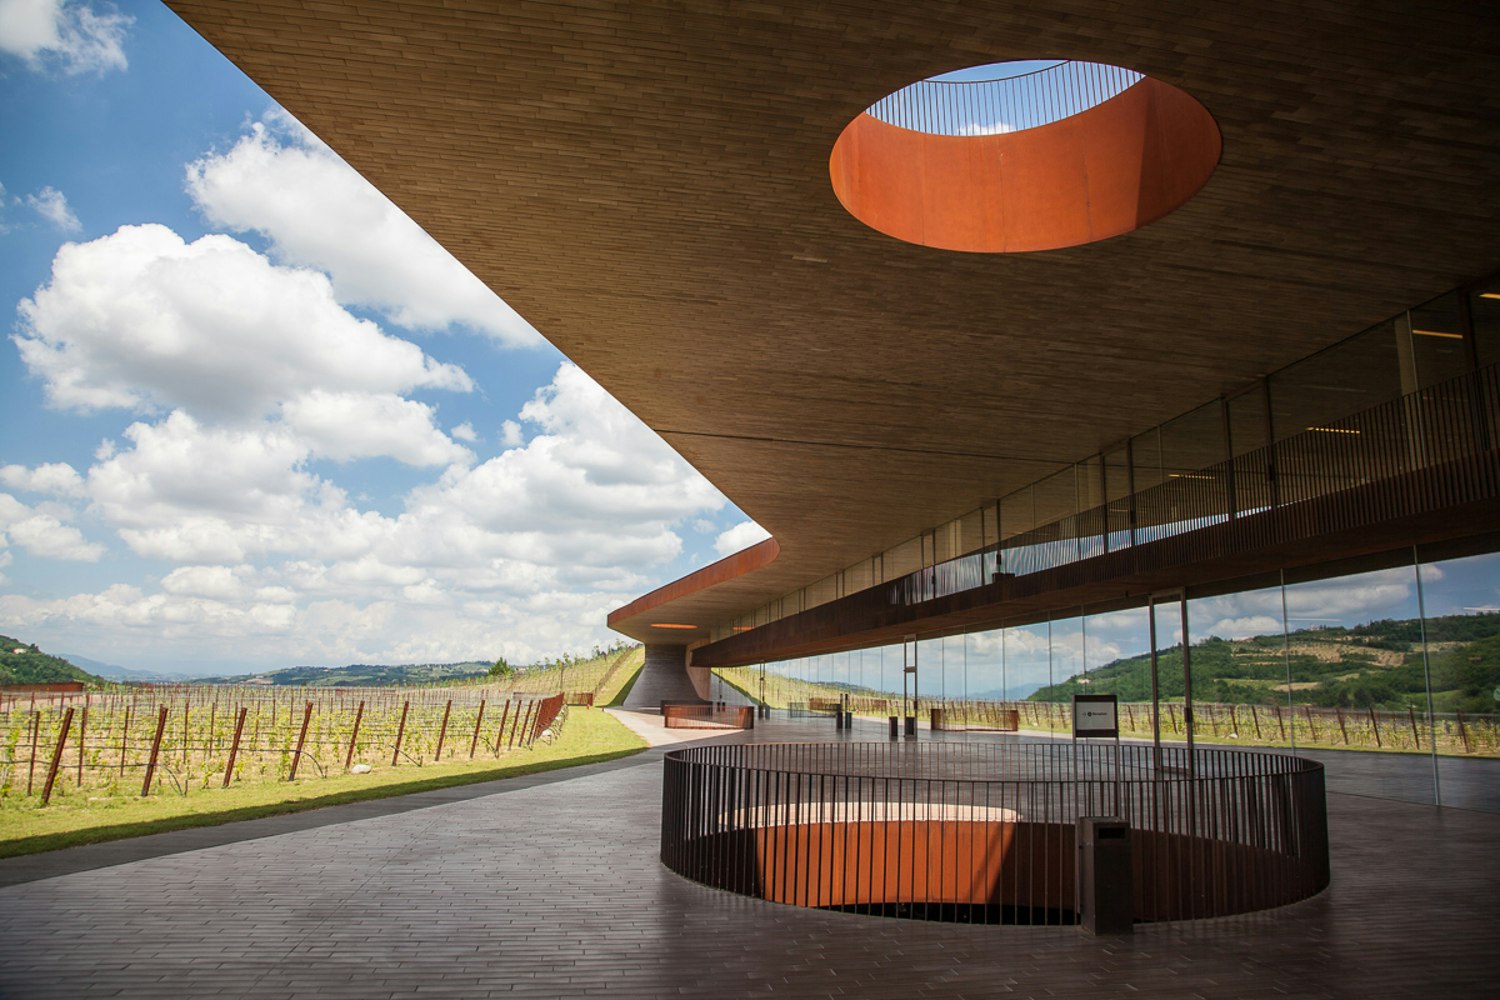 Sculptural architecture at Antinori winery